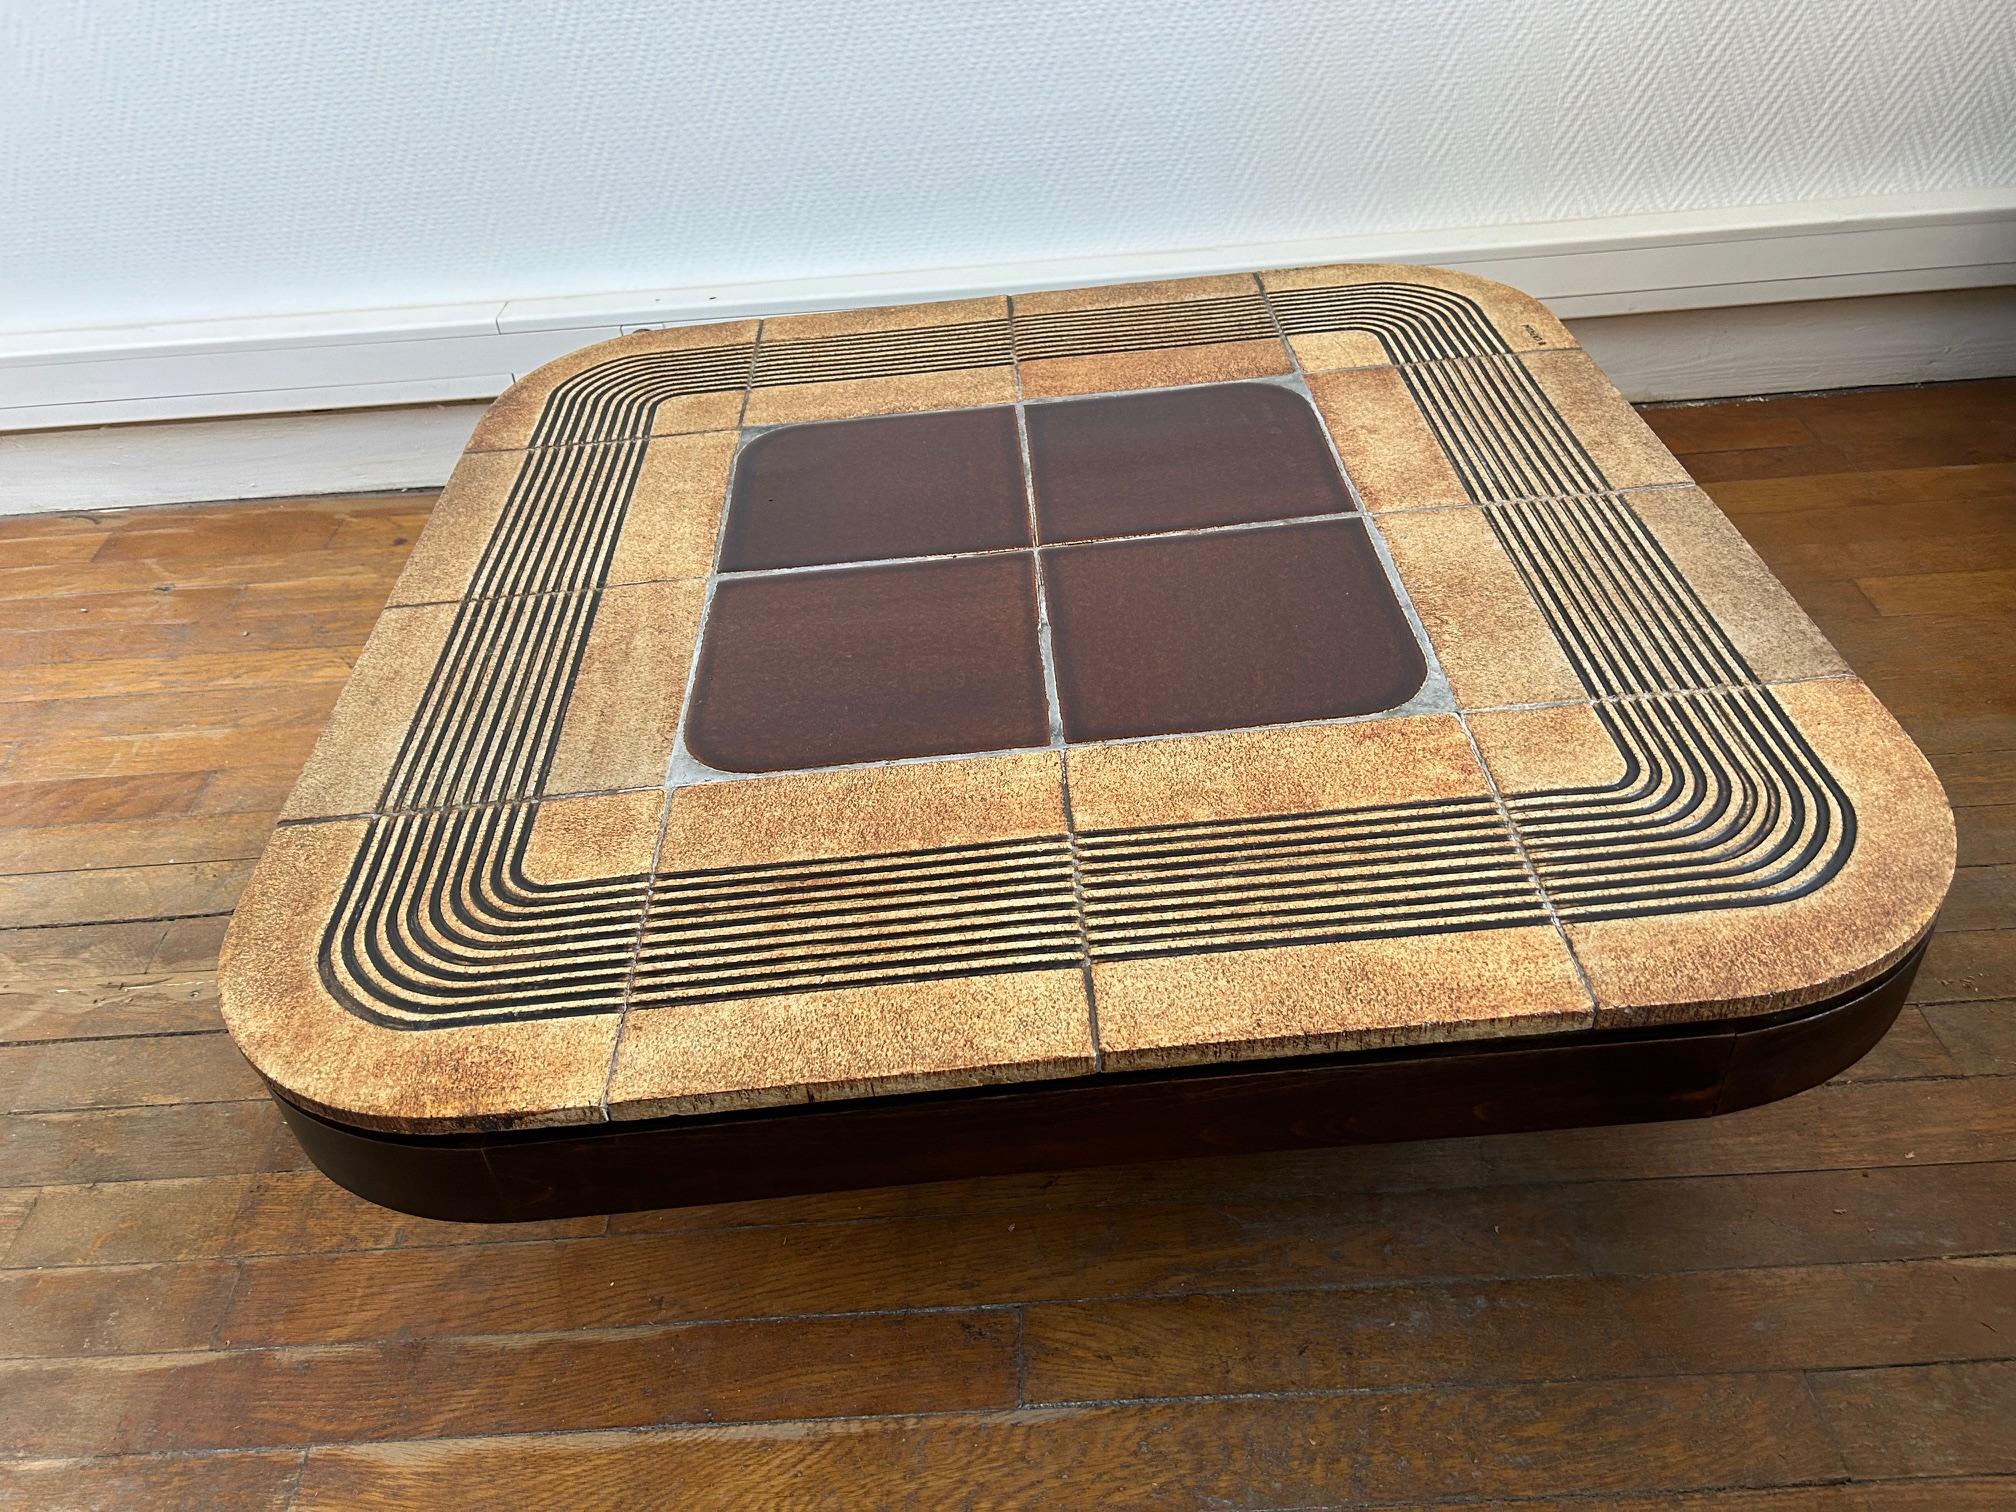 Mambo table by Roger Capron, ceramic and wood, France, 1970's